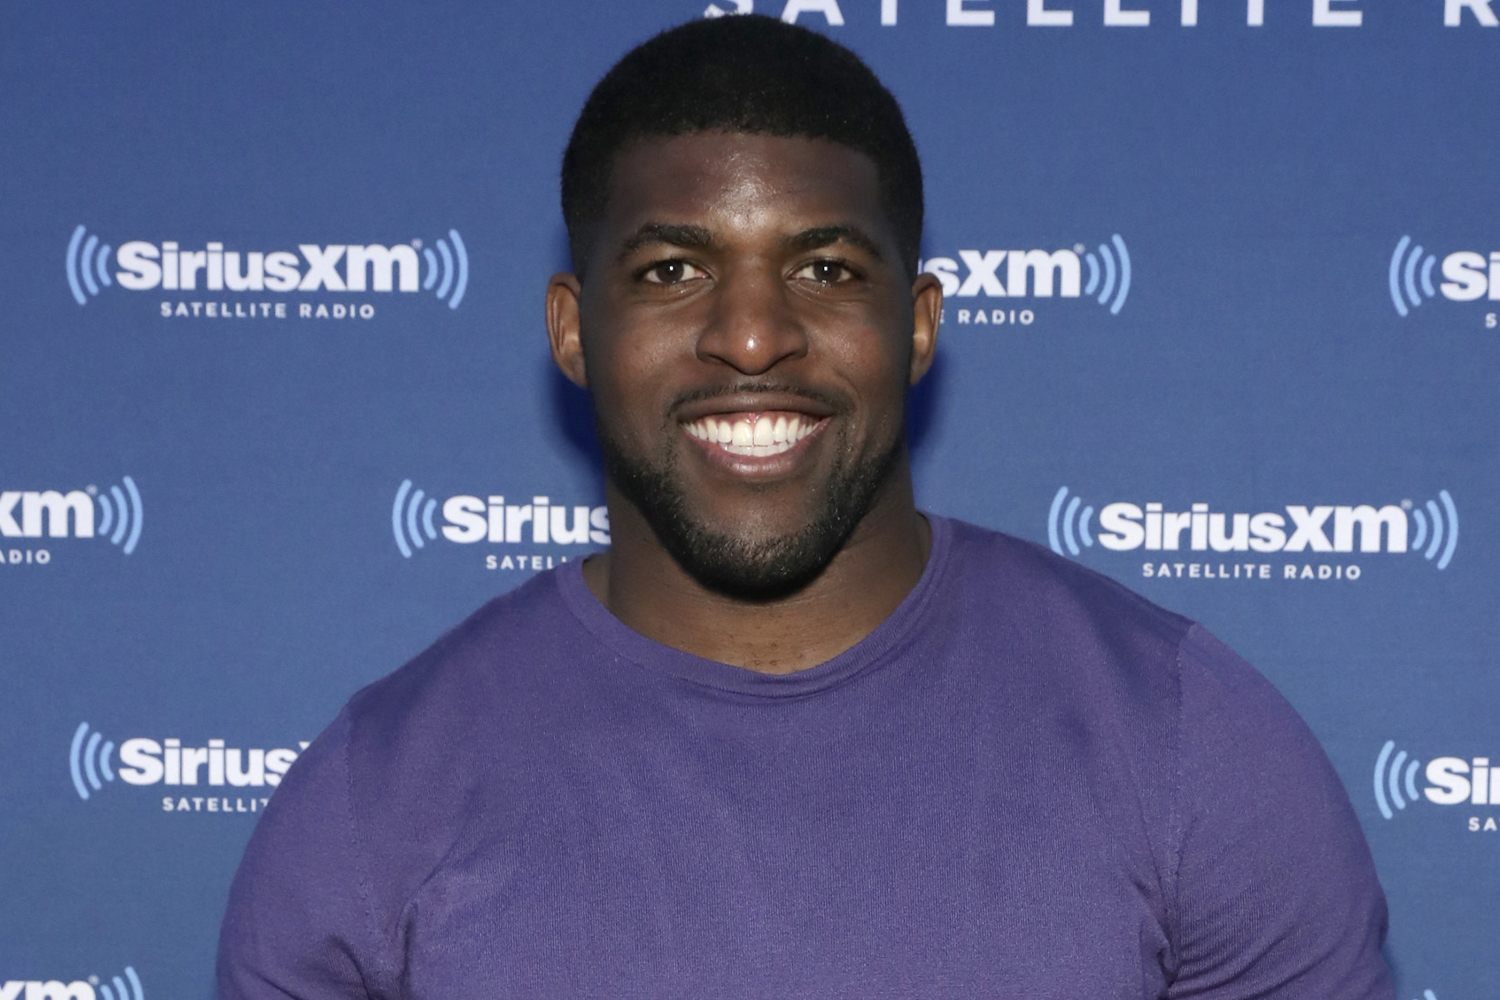 Emmanuel Acho replaces Chris Harrison for After the Final Rose on 'The Bachelor'